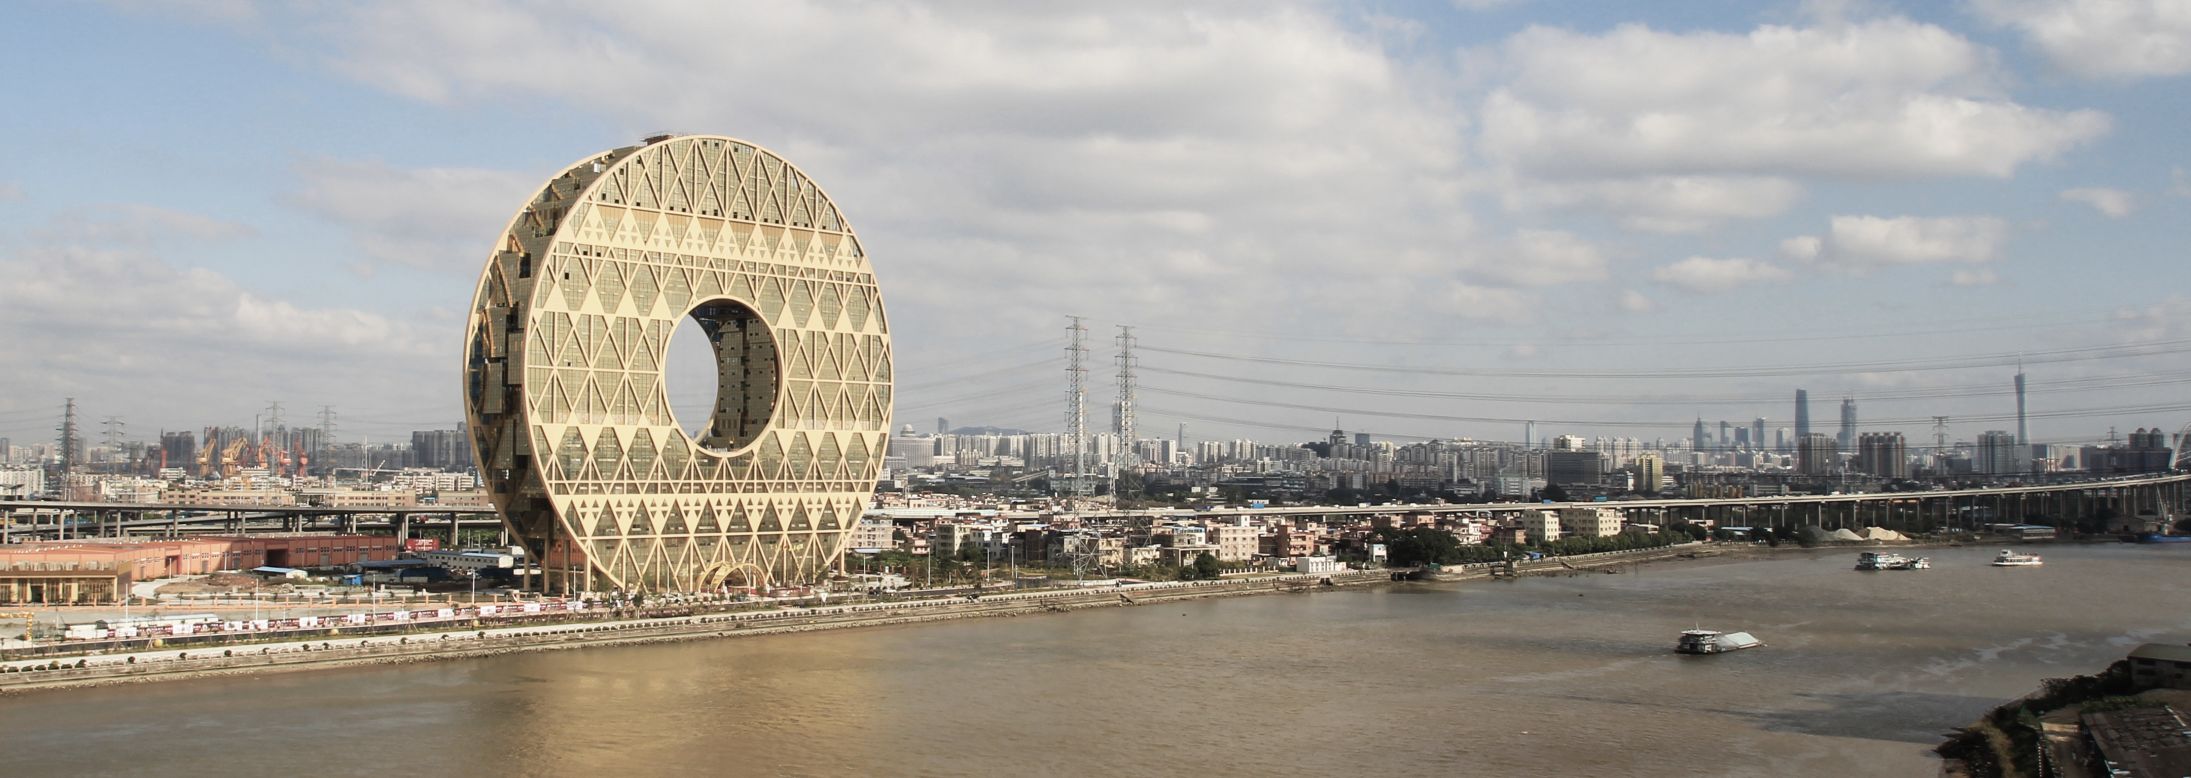 In October 2014, Xi called for less "weird architecture" to be built in the country. Don't worry, Guangdong Plastics Exchange, we still love you.